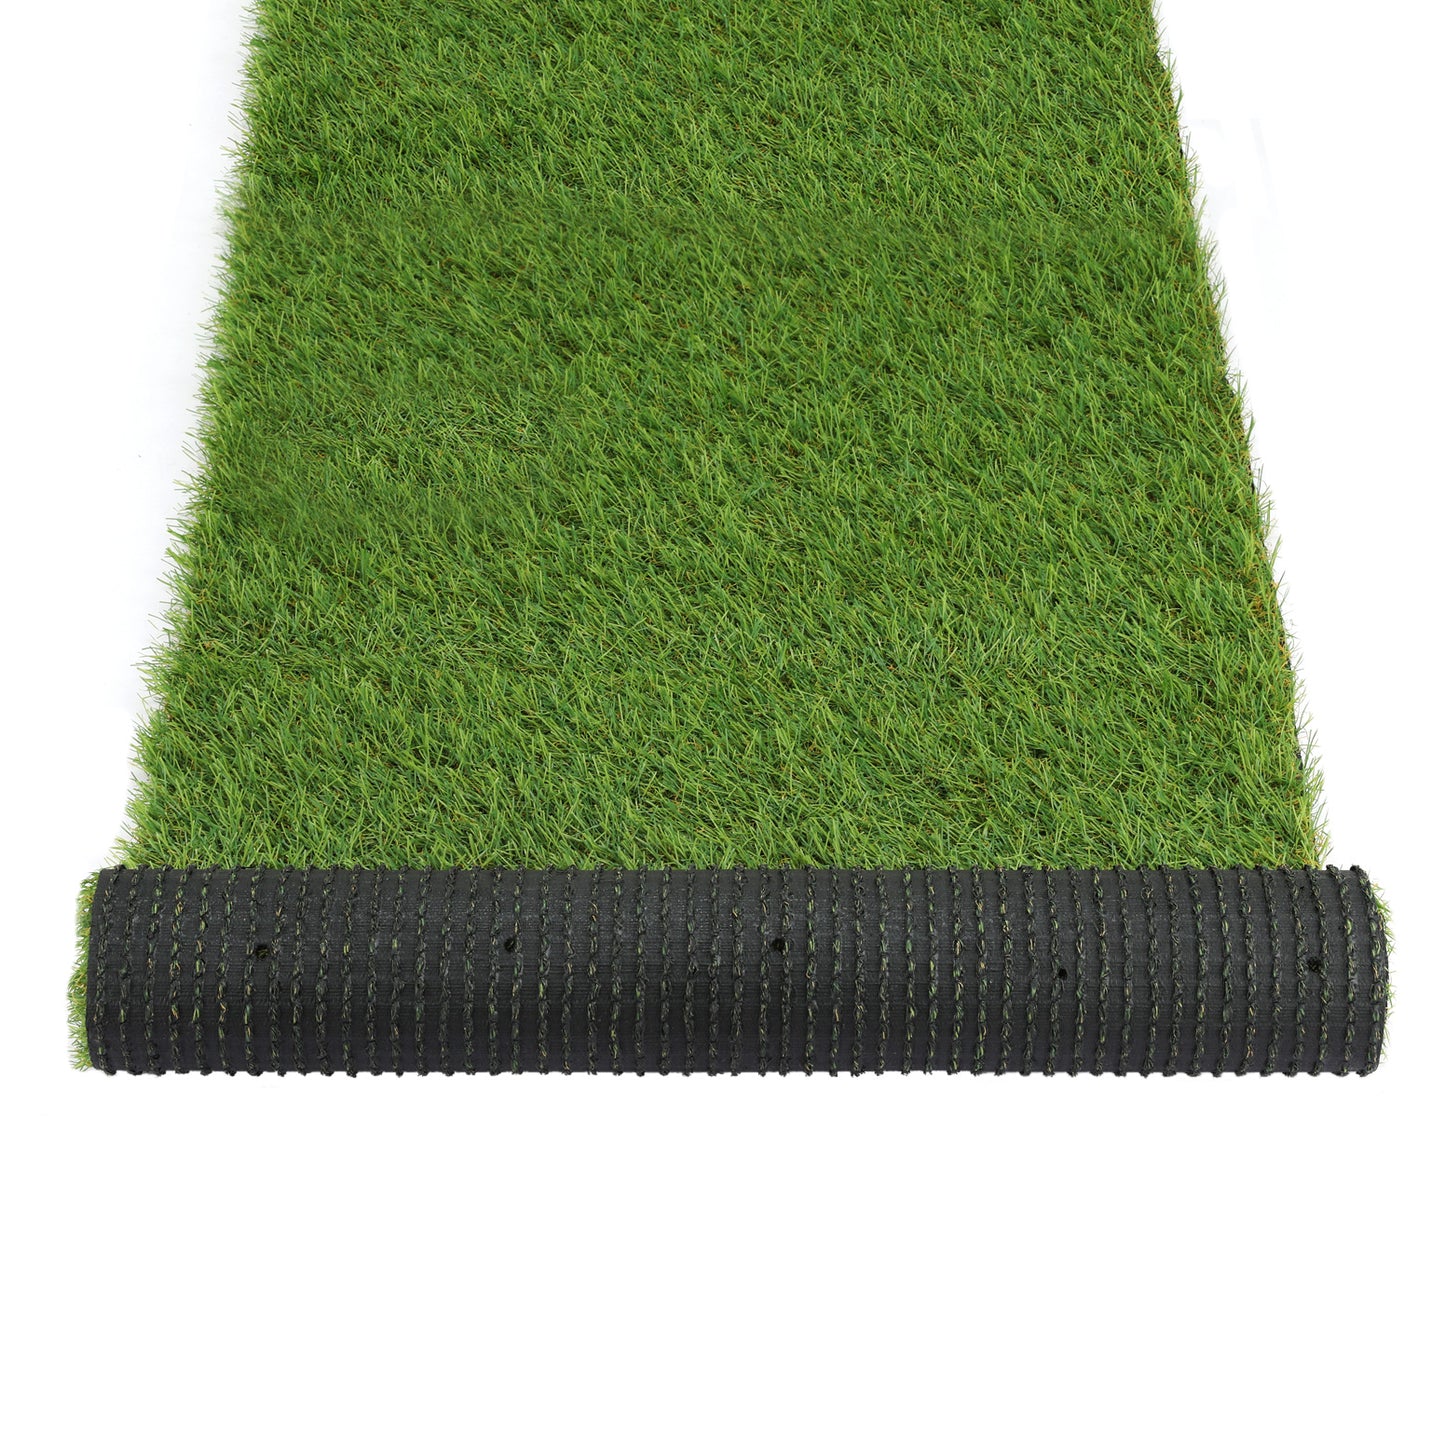 50sqm Artificial Grass 30mm 2mx5m Synthetic Fake Lawn Turf Plastic Plant - 4-Colour Green